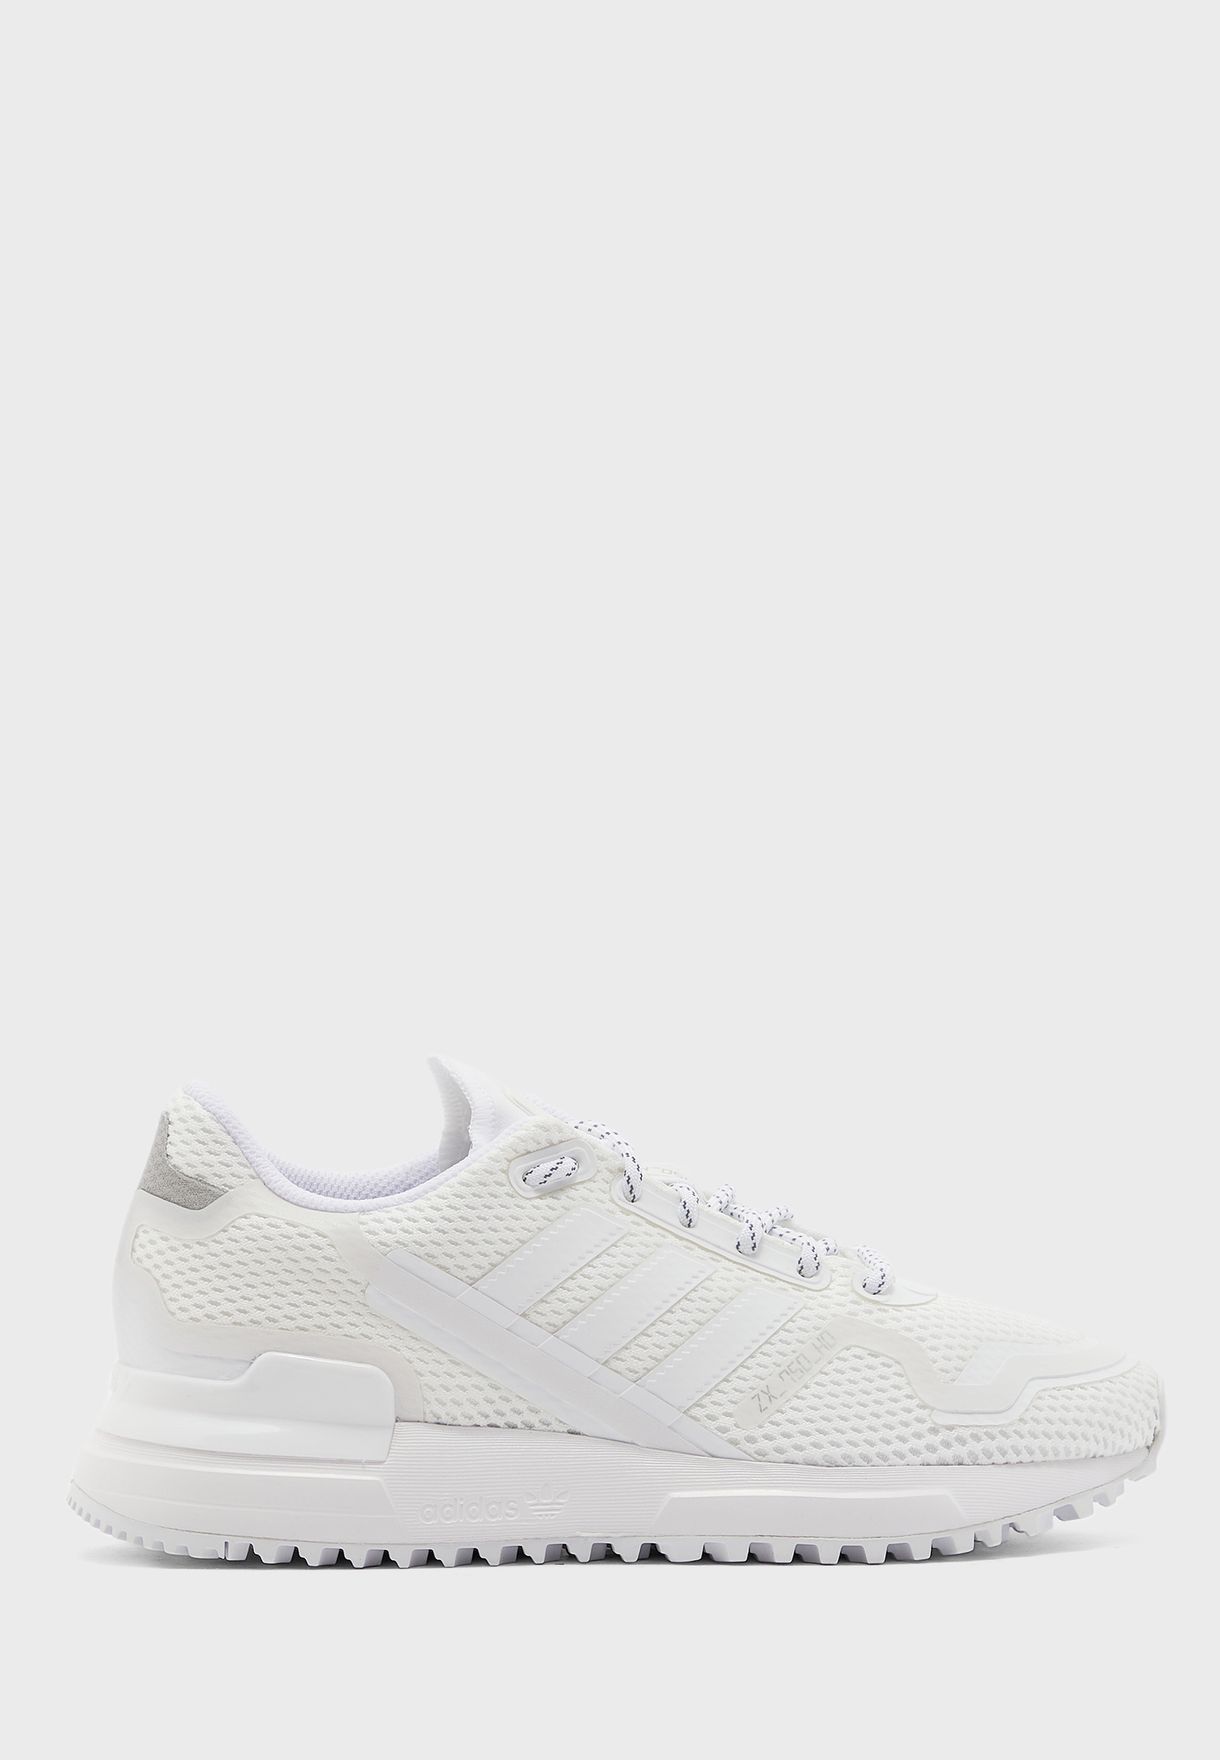 adidas zx youth